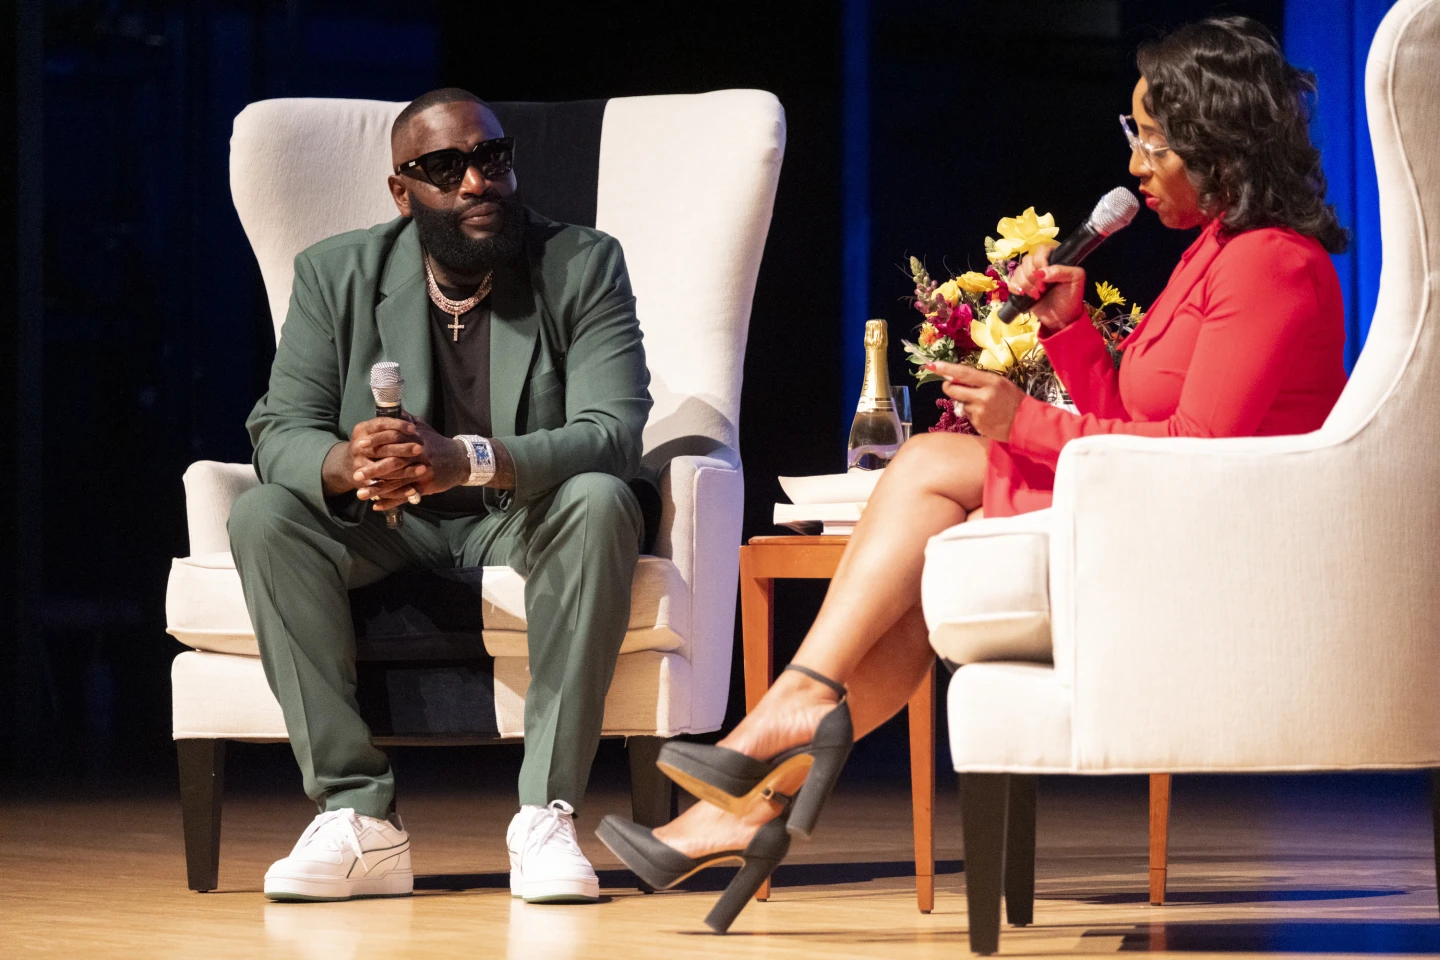 Classes on celebrities like Taylor Swift and Rick Ross are engaging a new generation of law students